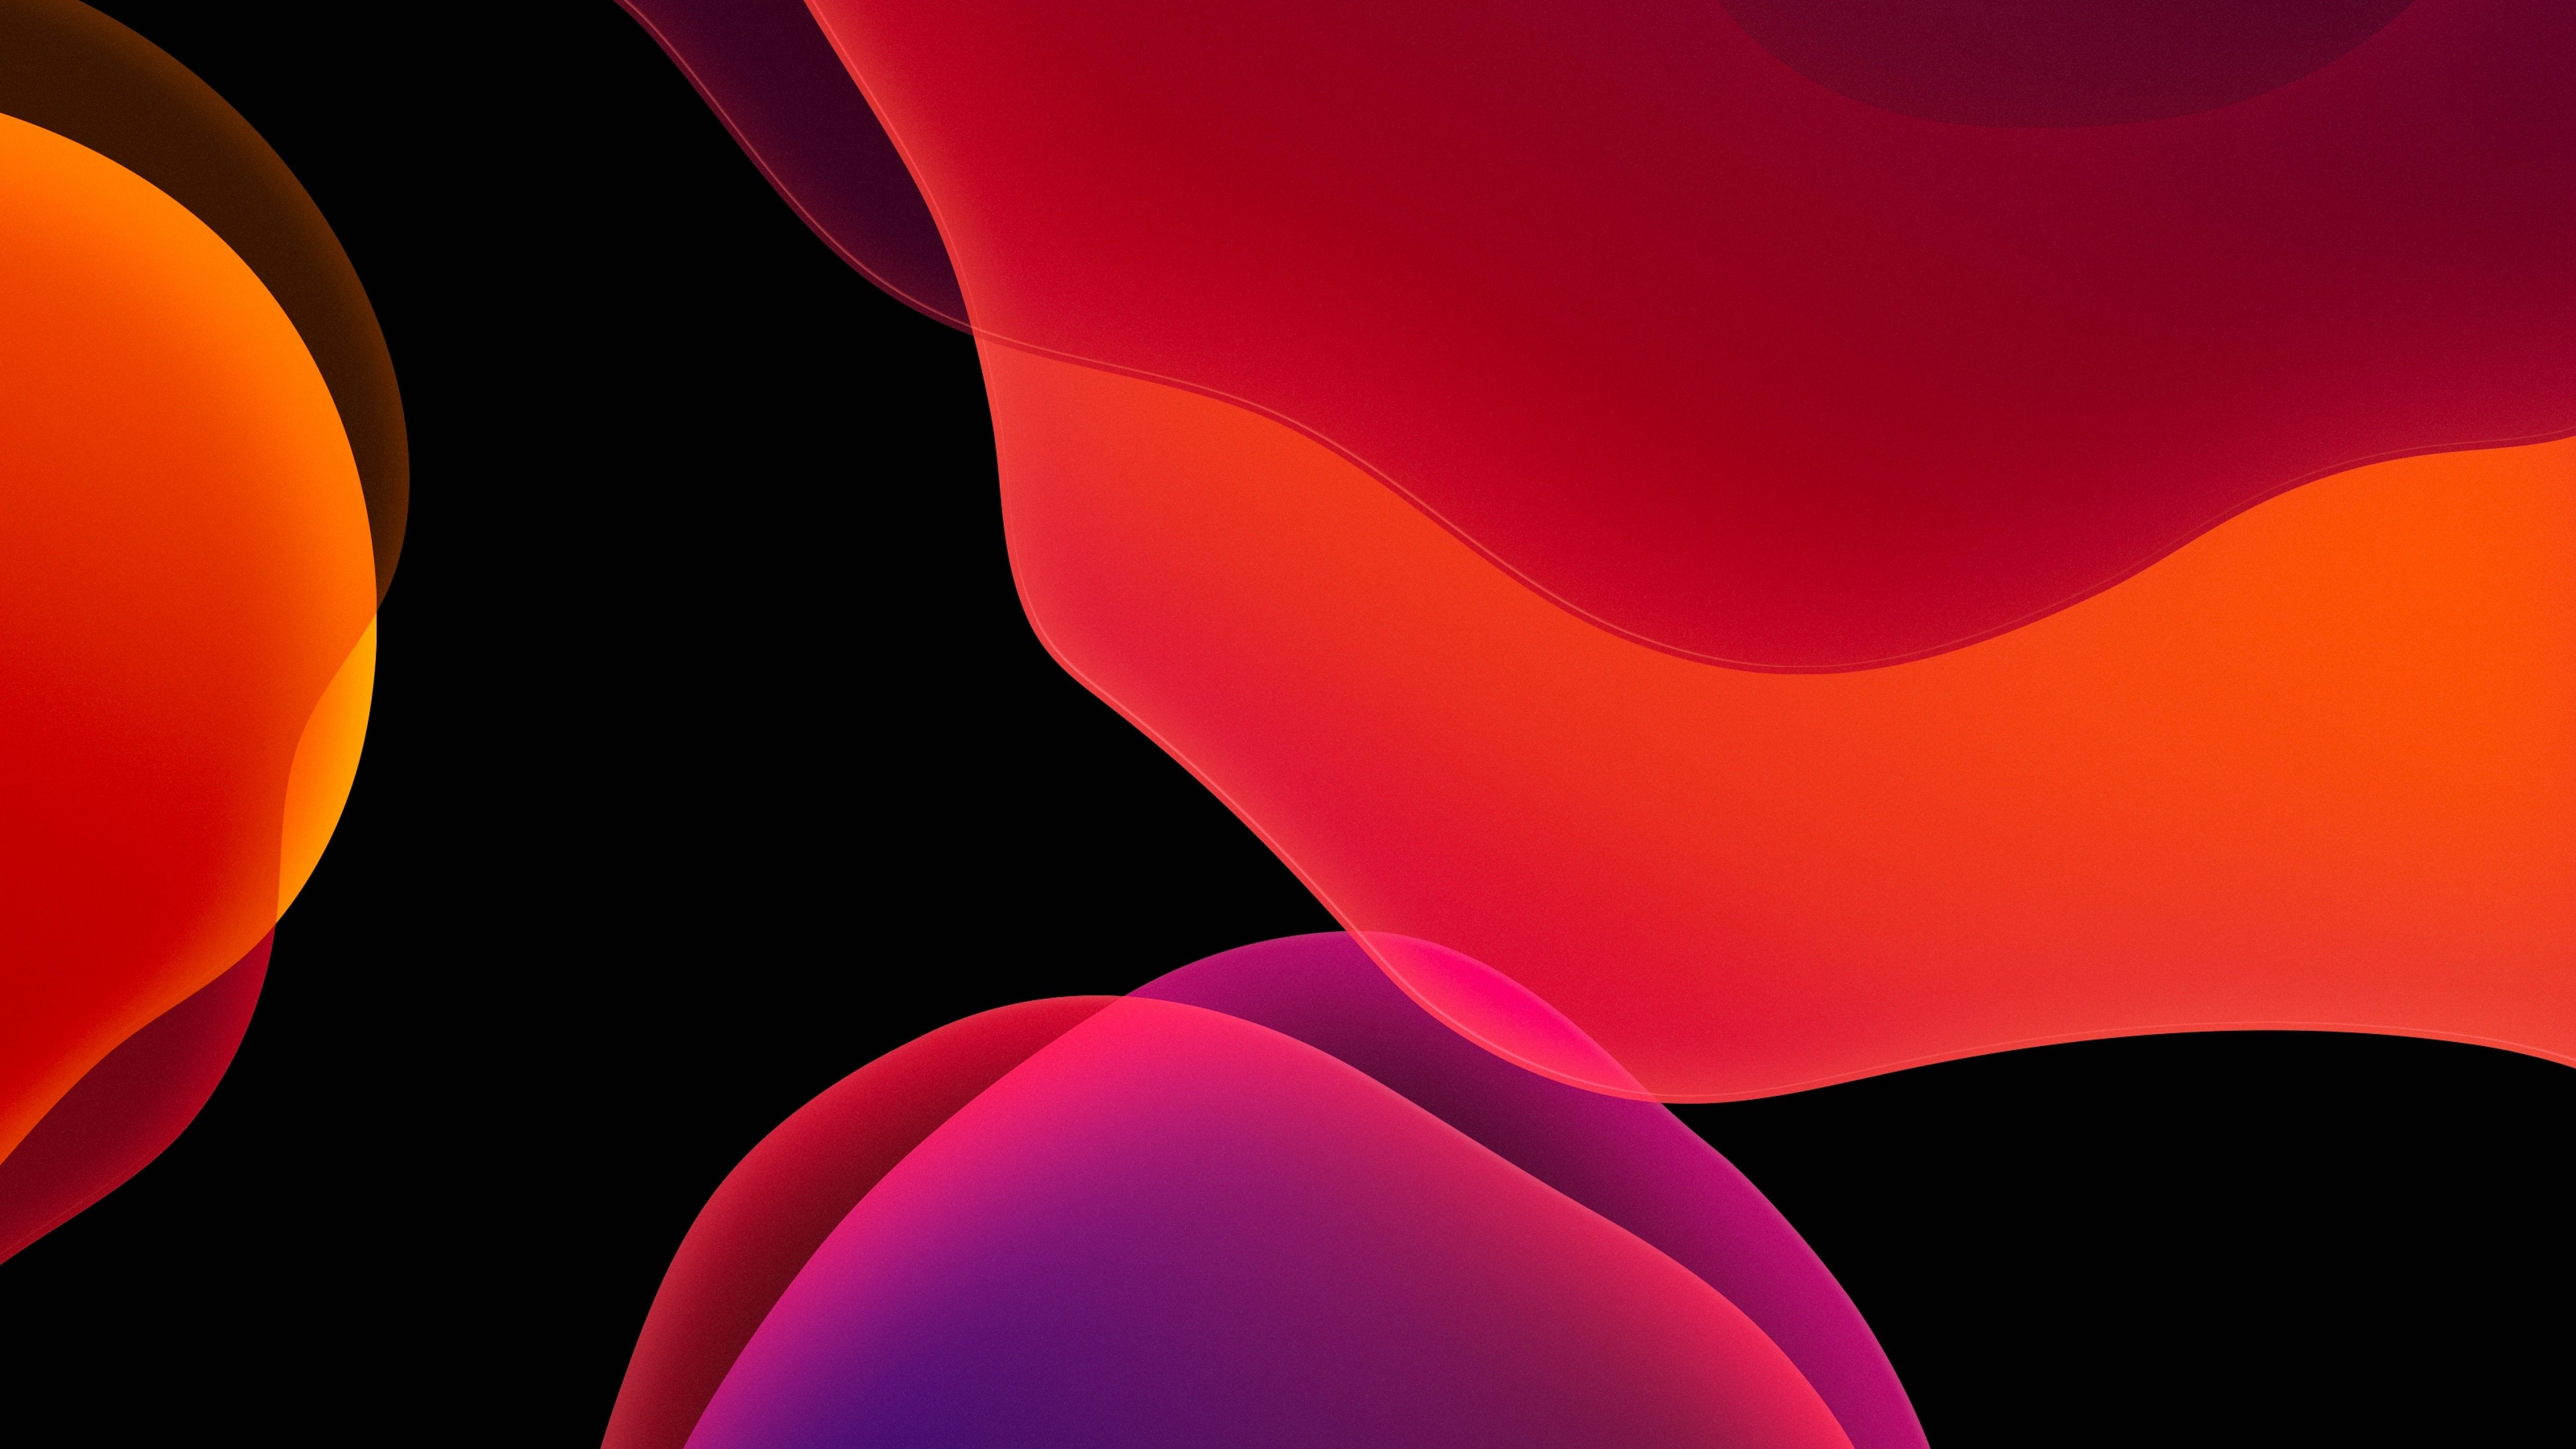 iOS 13 Wallpaper 4K, Stock, iPadOS, Red, Black background, AMOLED, Abstract